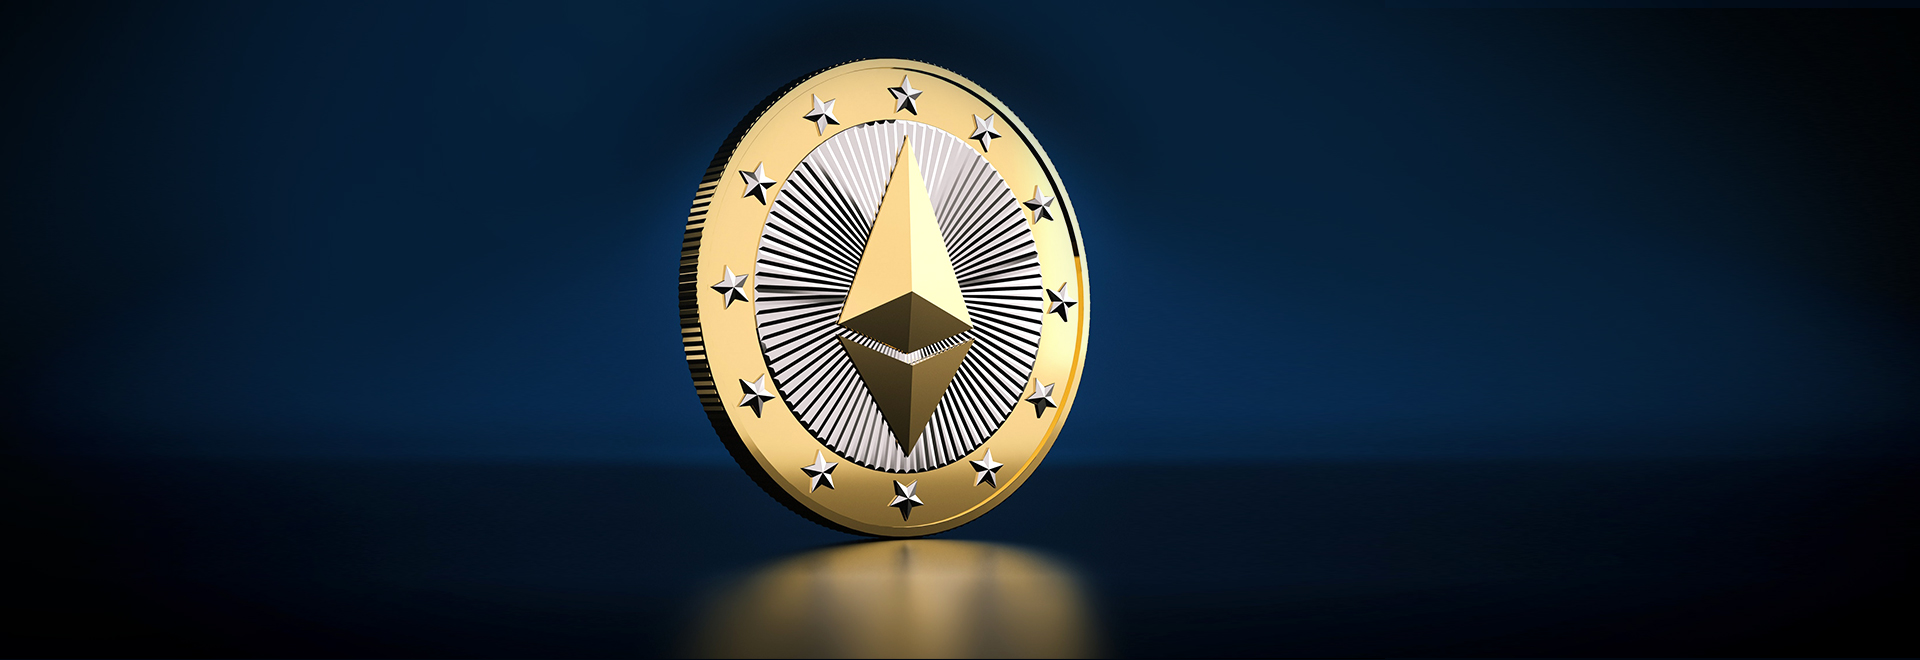 Ethereum's Value Has Demonstrated A Remarkable Upturn